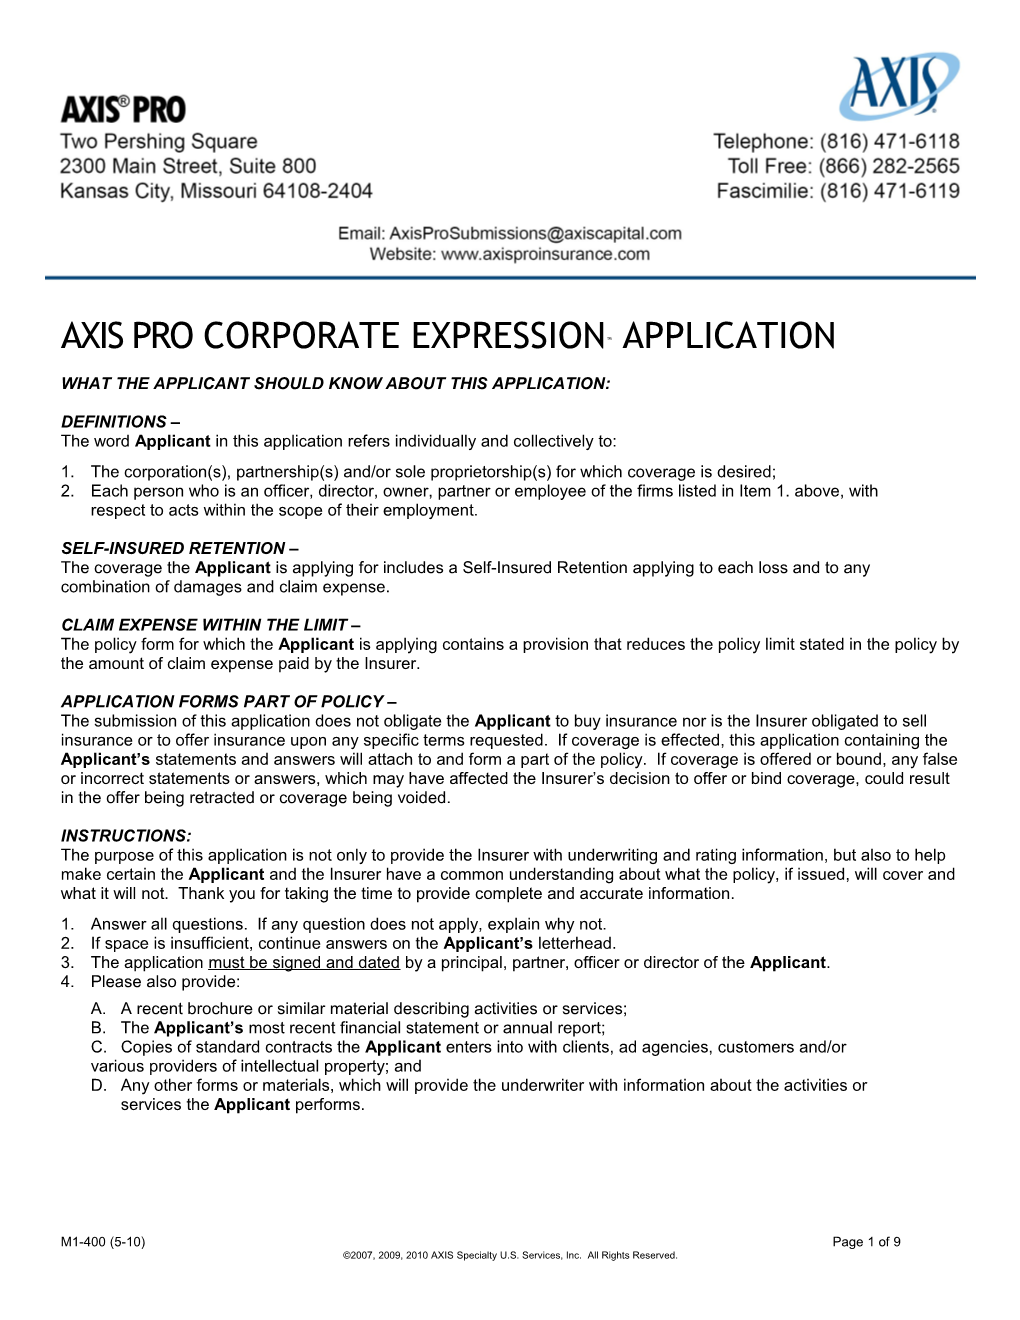 Corporate Expression Liability Application